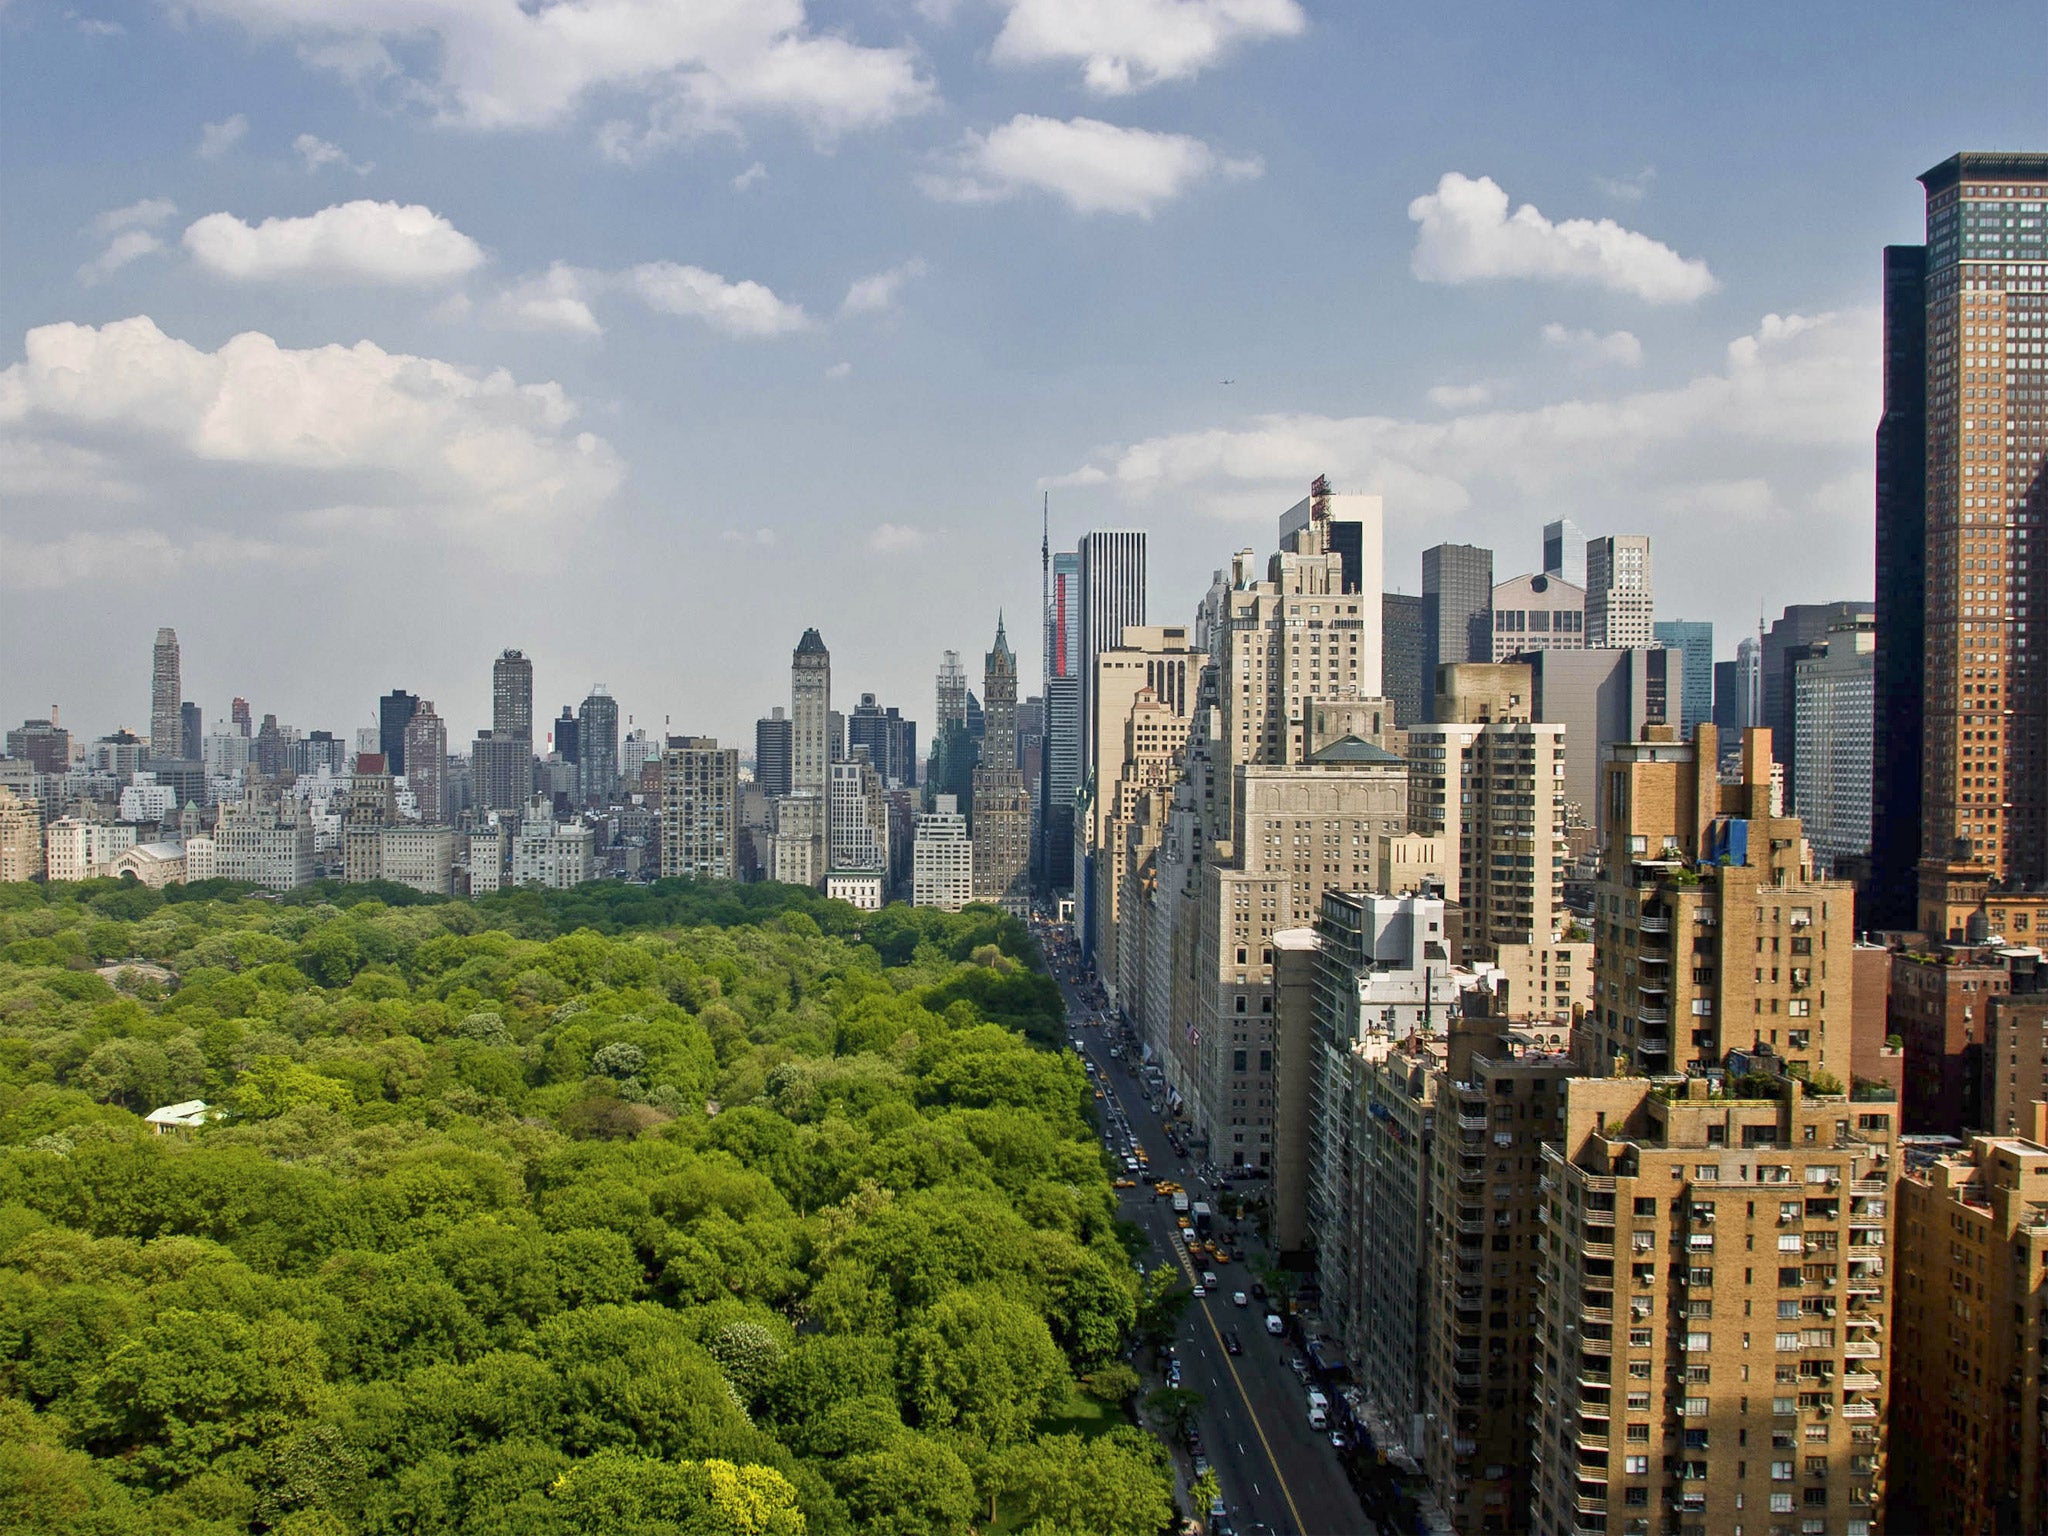 As in London, it is the classic areas of Manhattan that are proving appealing